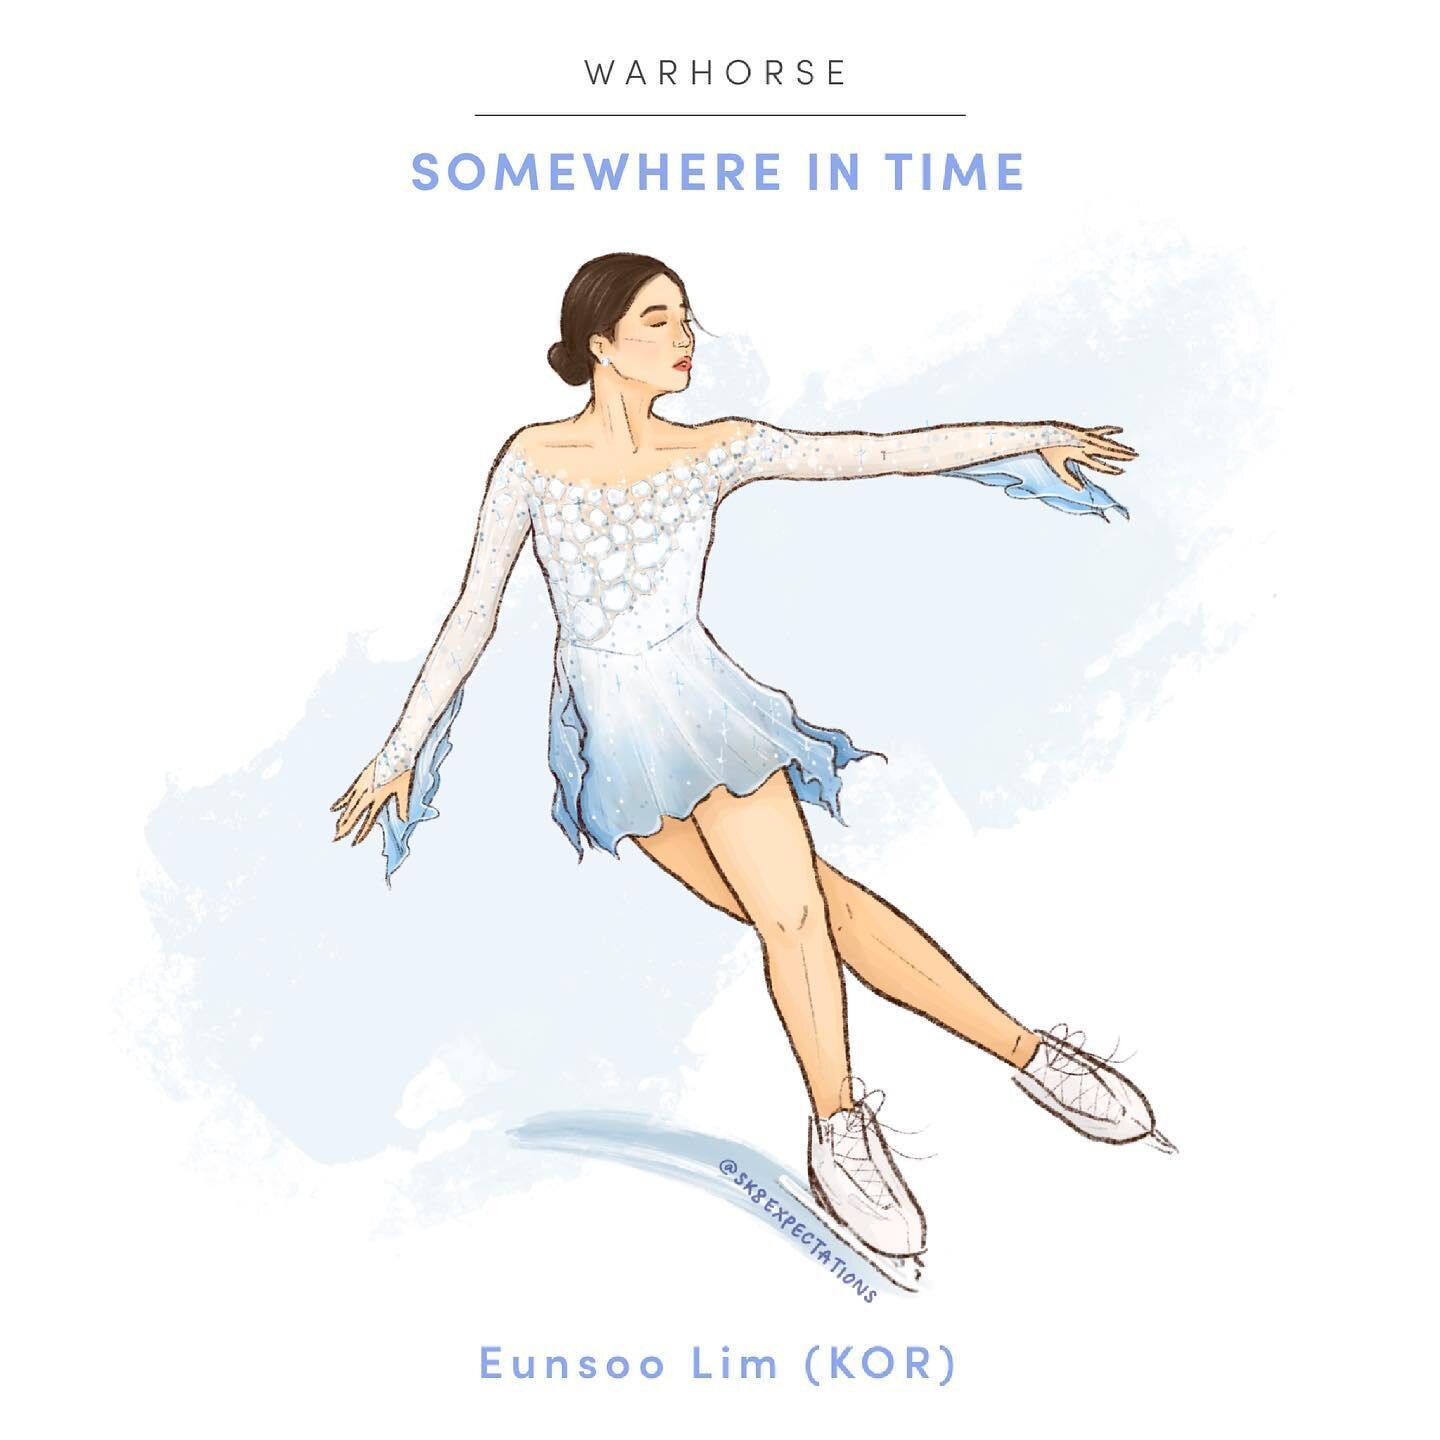 WARHORSE: &ldquo;Somewhere in Time - OST&rdquo; (John Barry)
-
Eun-soo Lim (KOR)
-
2019 World Figure Skating Championships, Short Program
-
Choreographed by Jeffrey Buttle
-
This program was the perfect way for Lim to announce her arrival in the seni